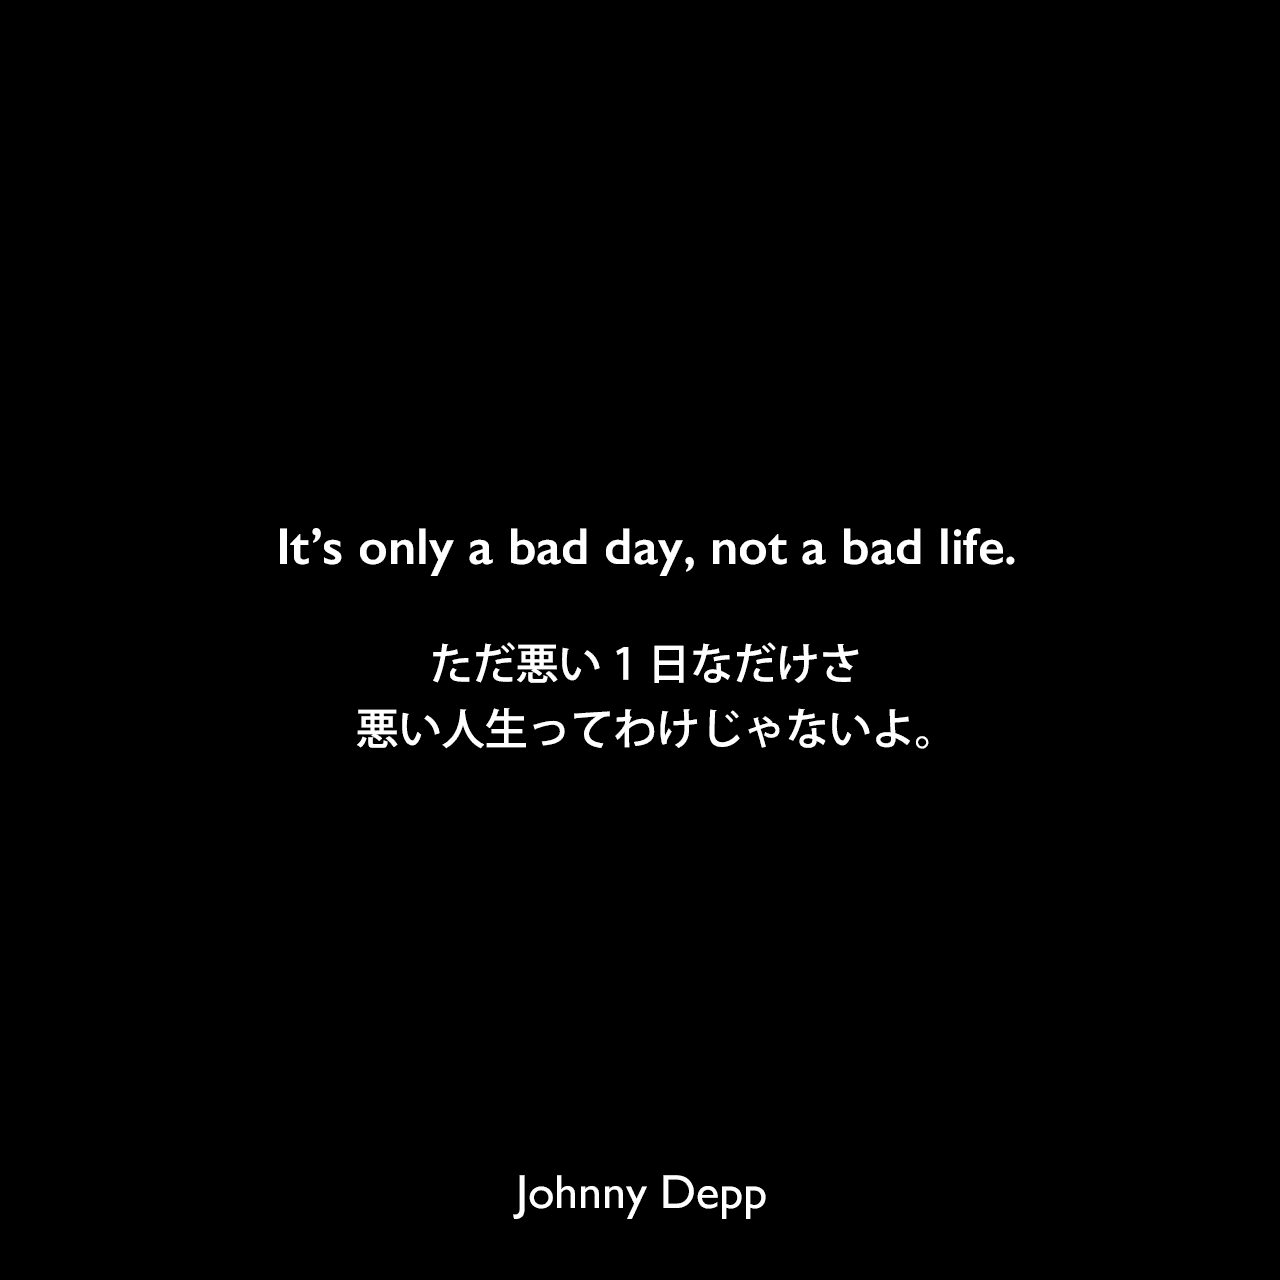 It’s only a bad day, not a bad life.ただ悪い1日なだけさ、悪い人生ってわけじゃないよ。